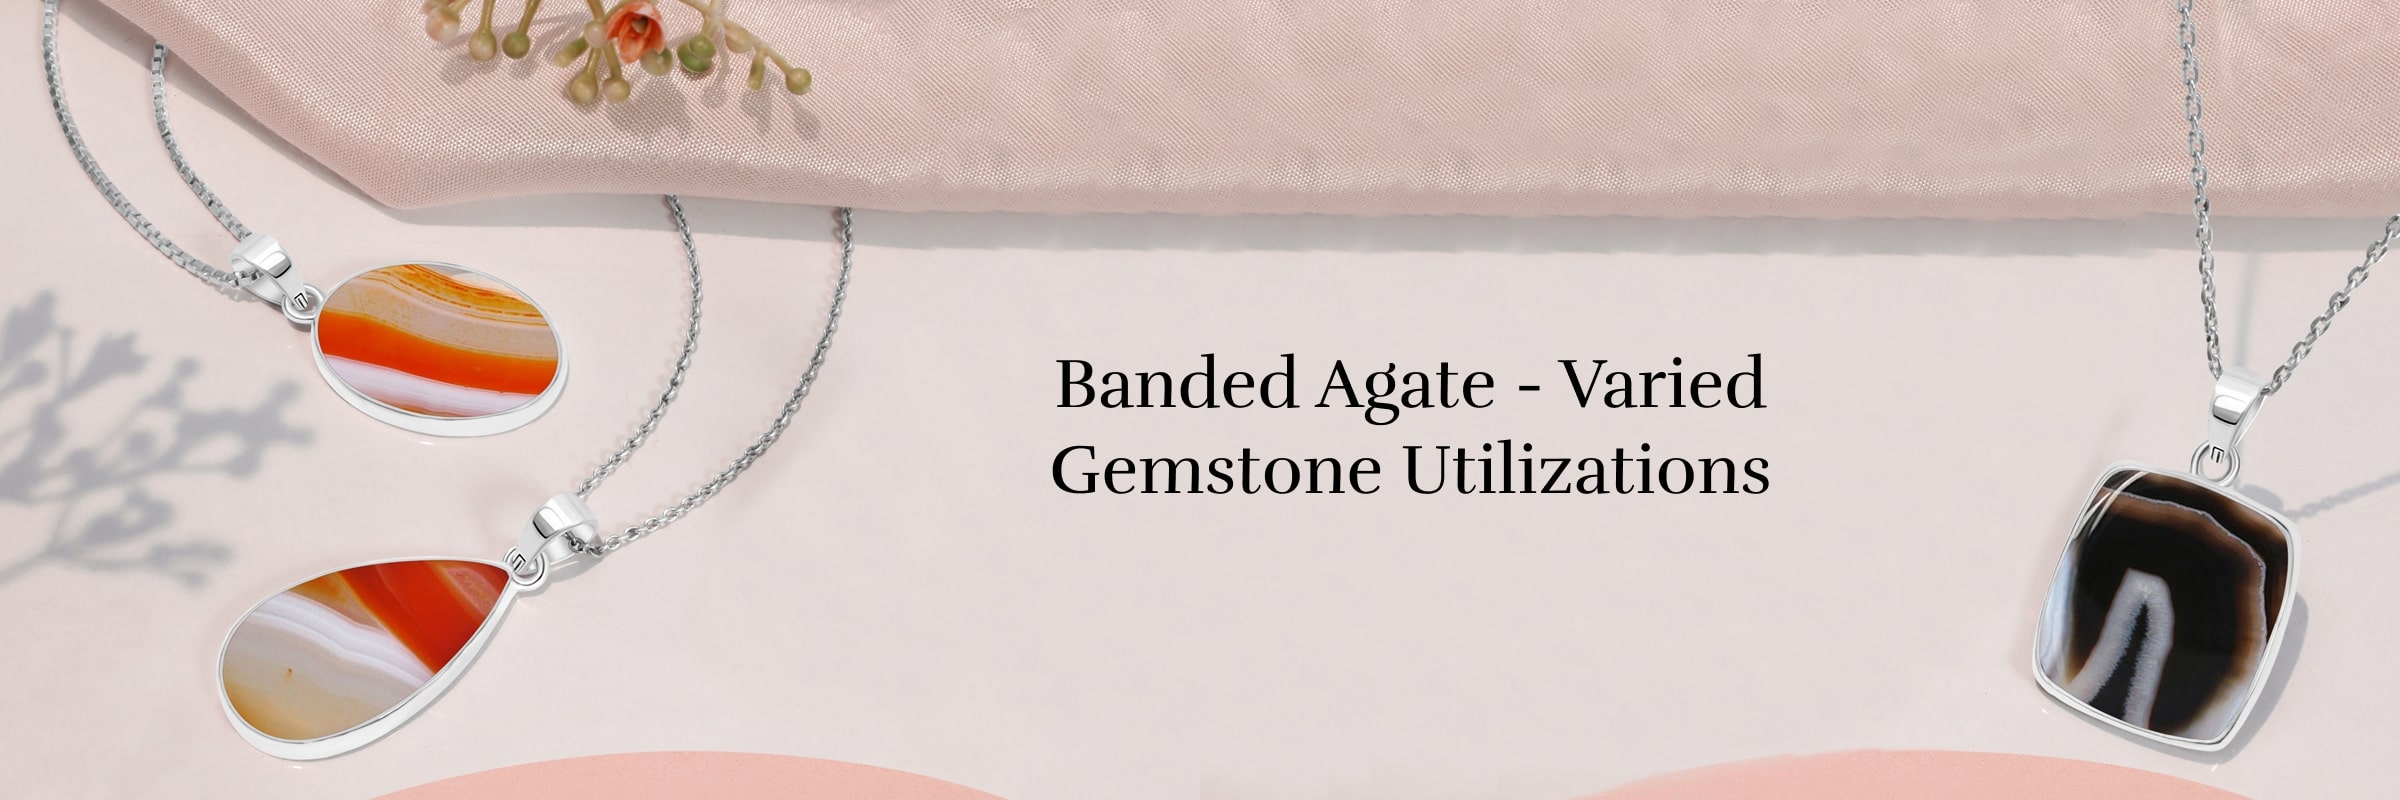 Uses of Banded Agate Gemstone